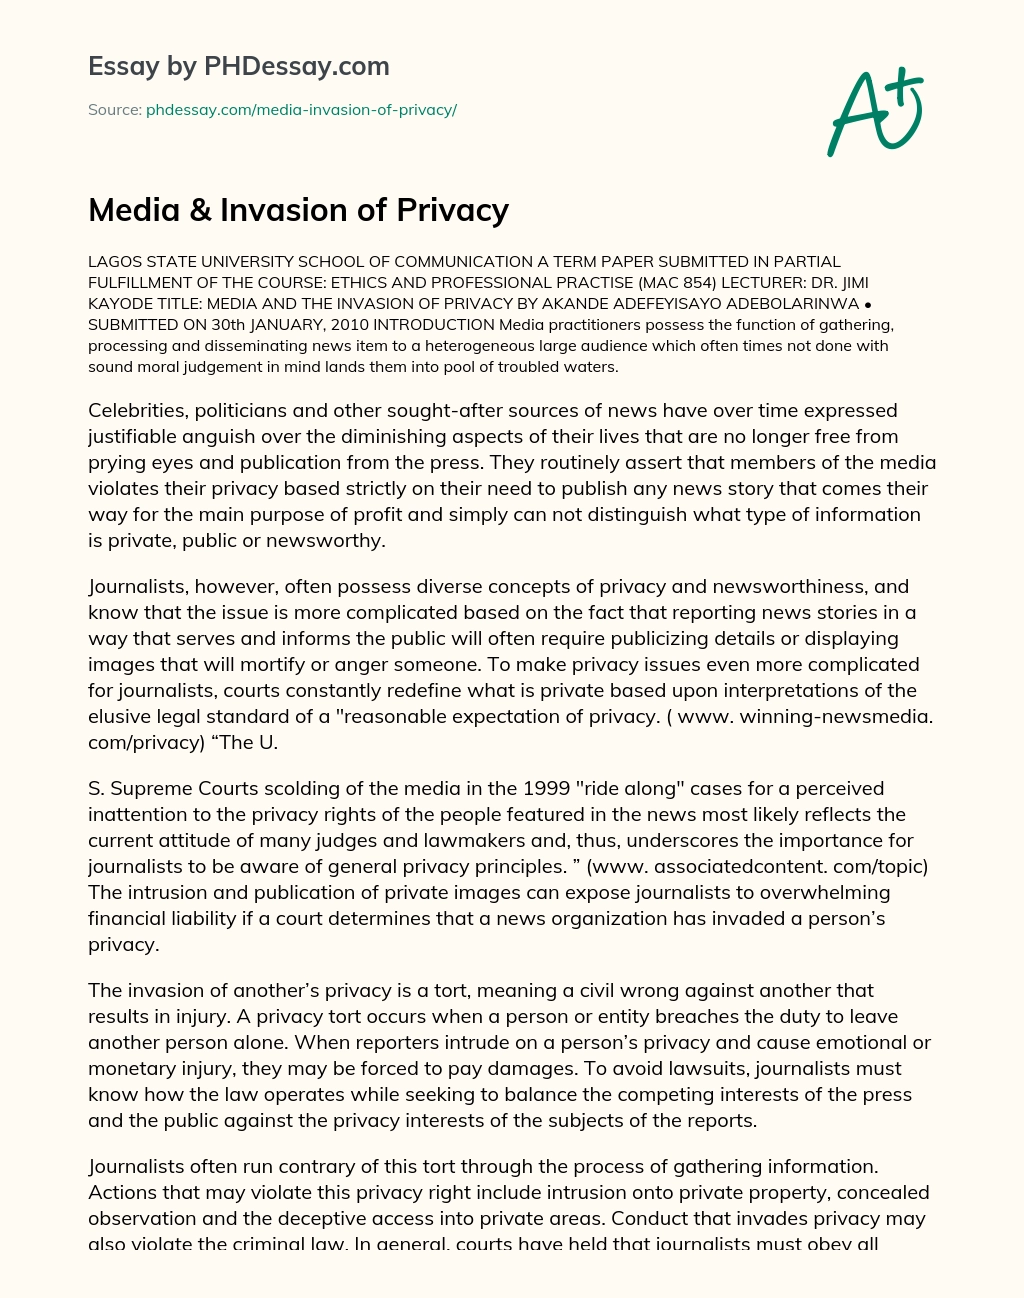 social media and invasion of privacy essay